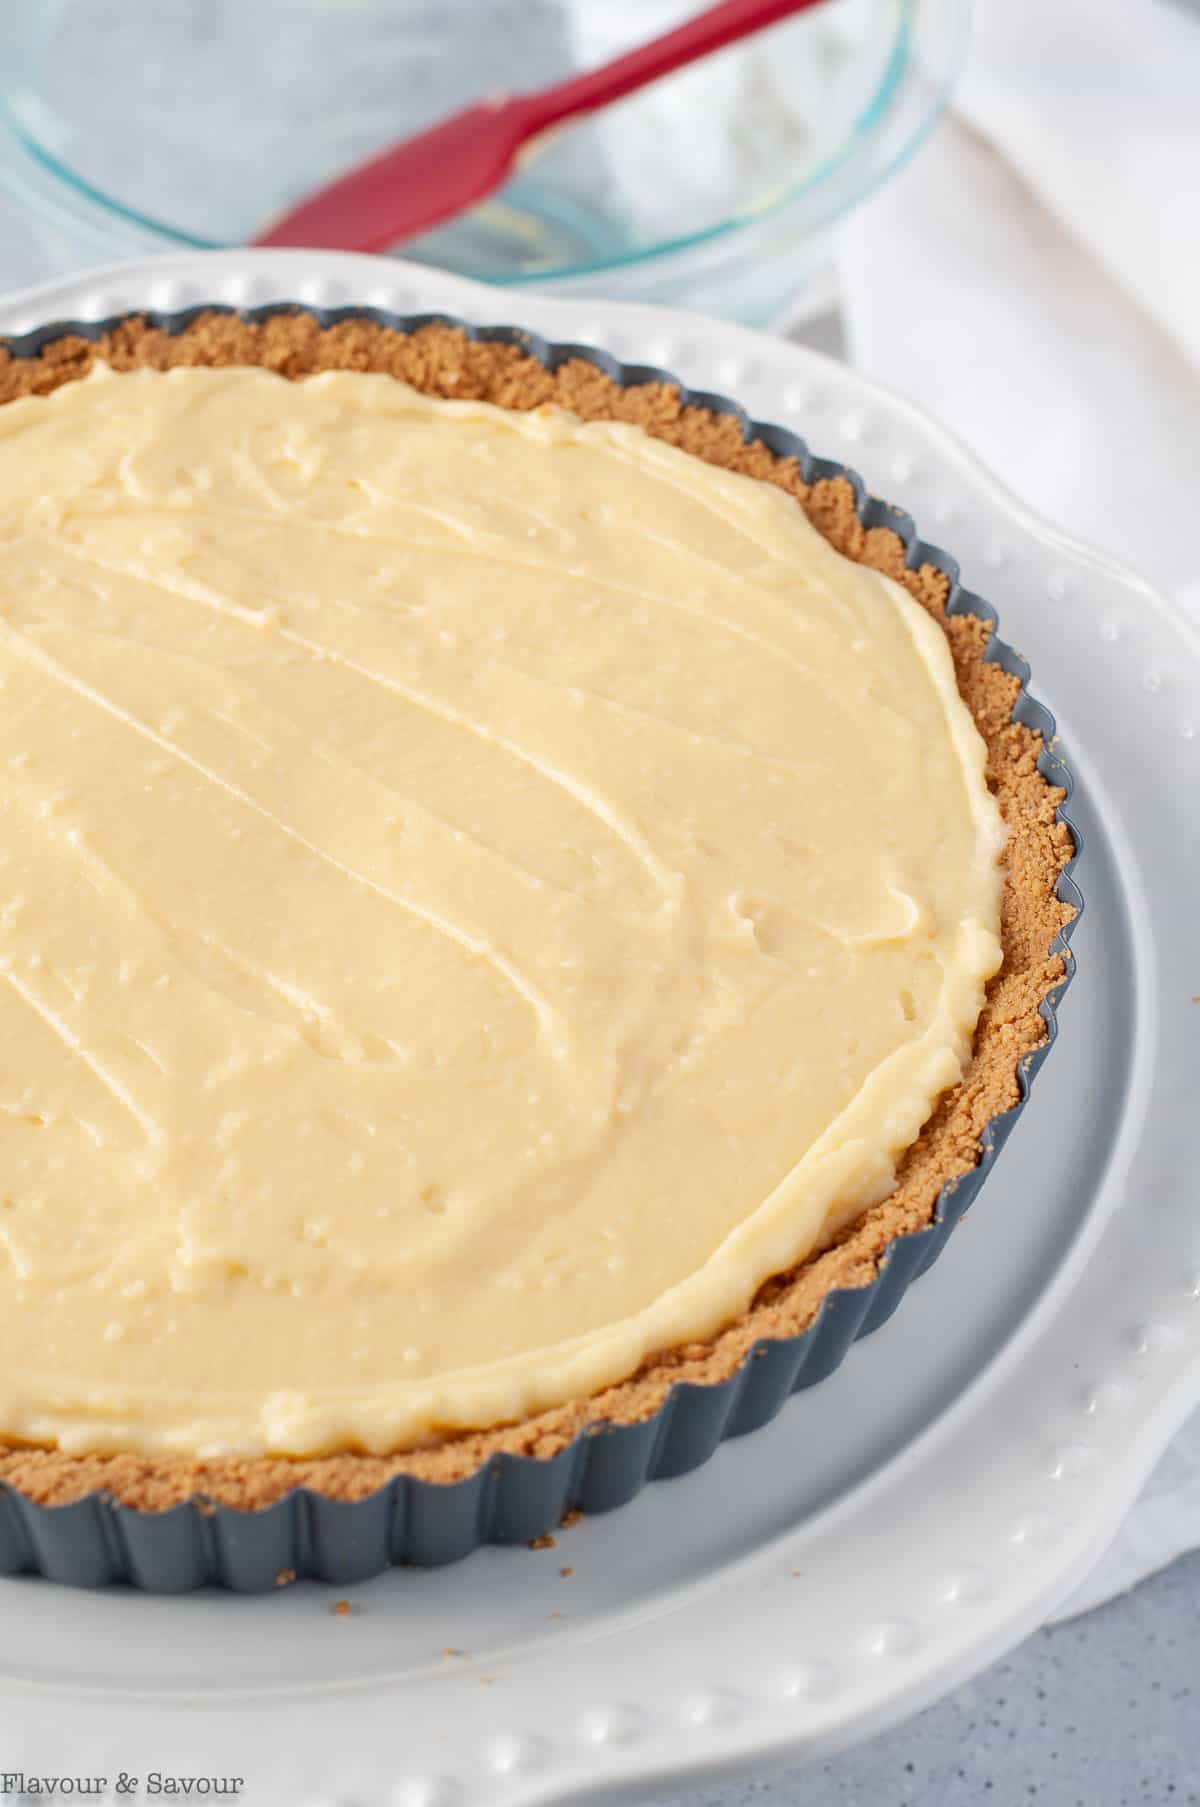 Adding vanilla pastry cream filling to a gluten-free graham cracker crust in a tart pan with a removable bottom.